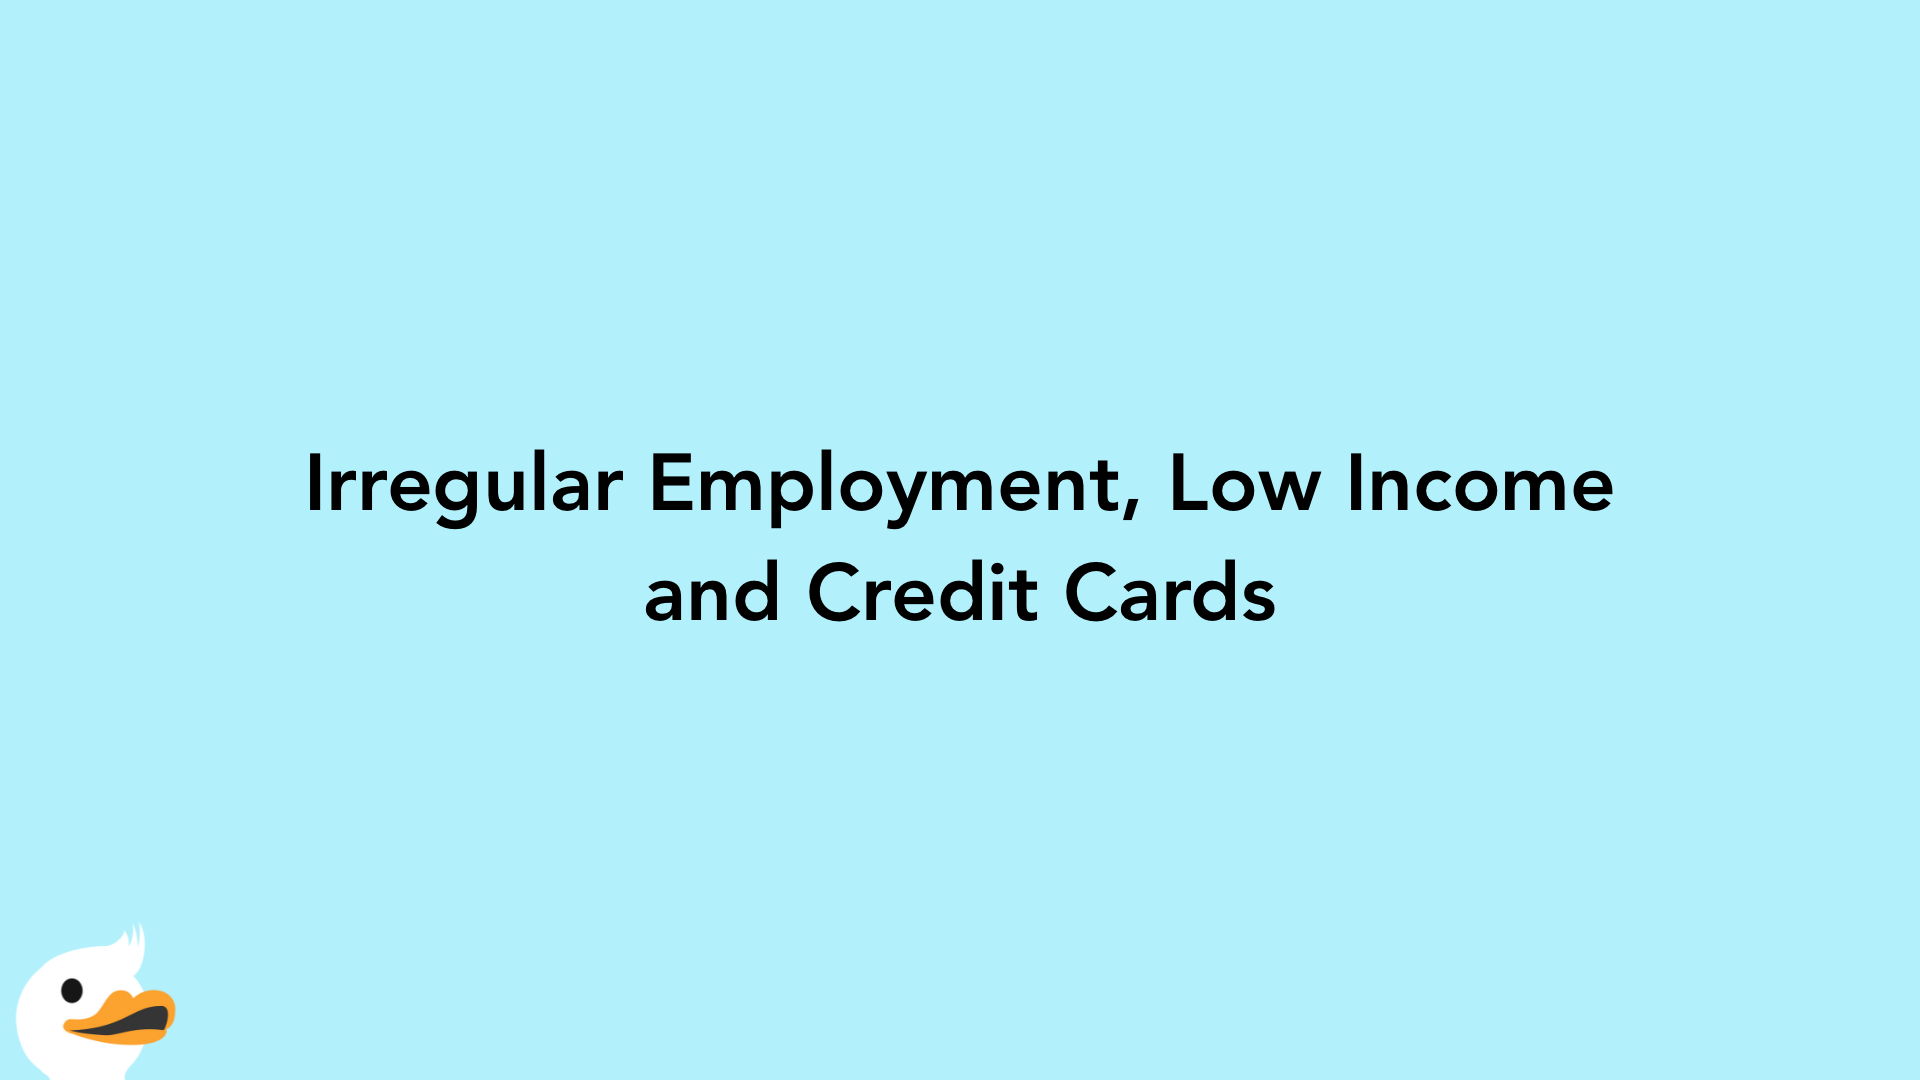 Irregular Employment, Low Income and Credit Cards